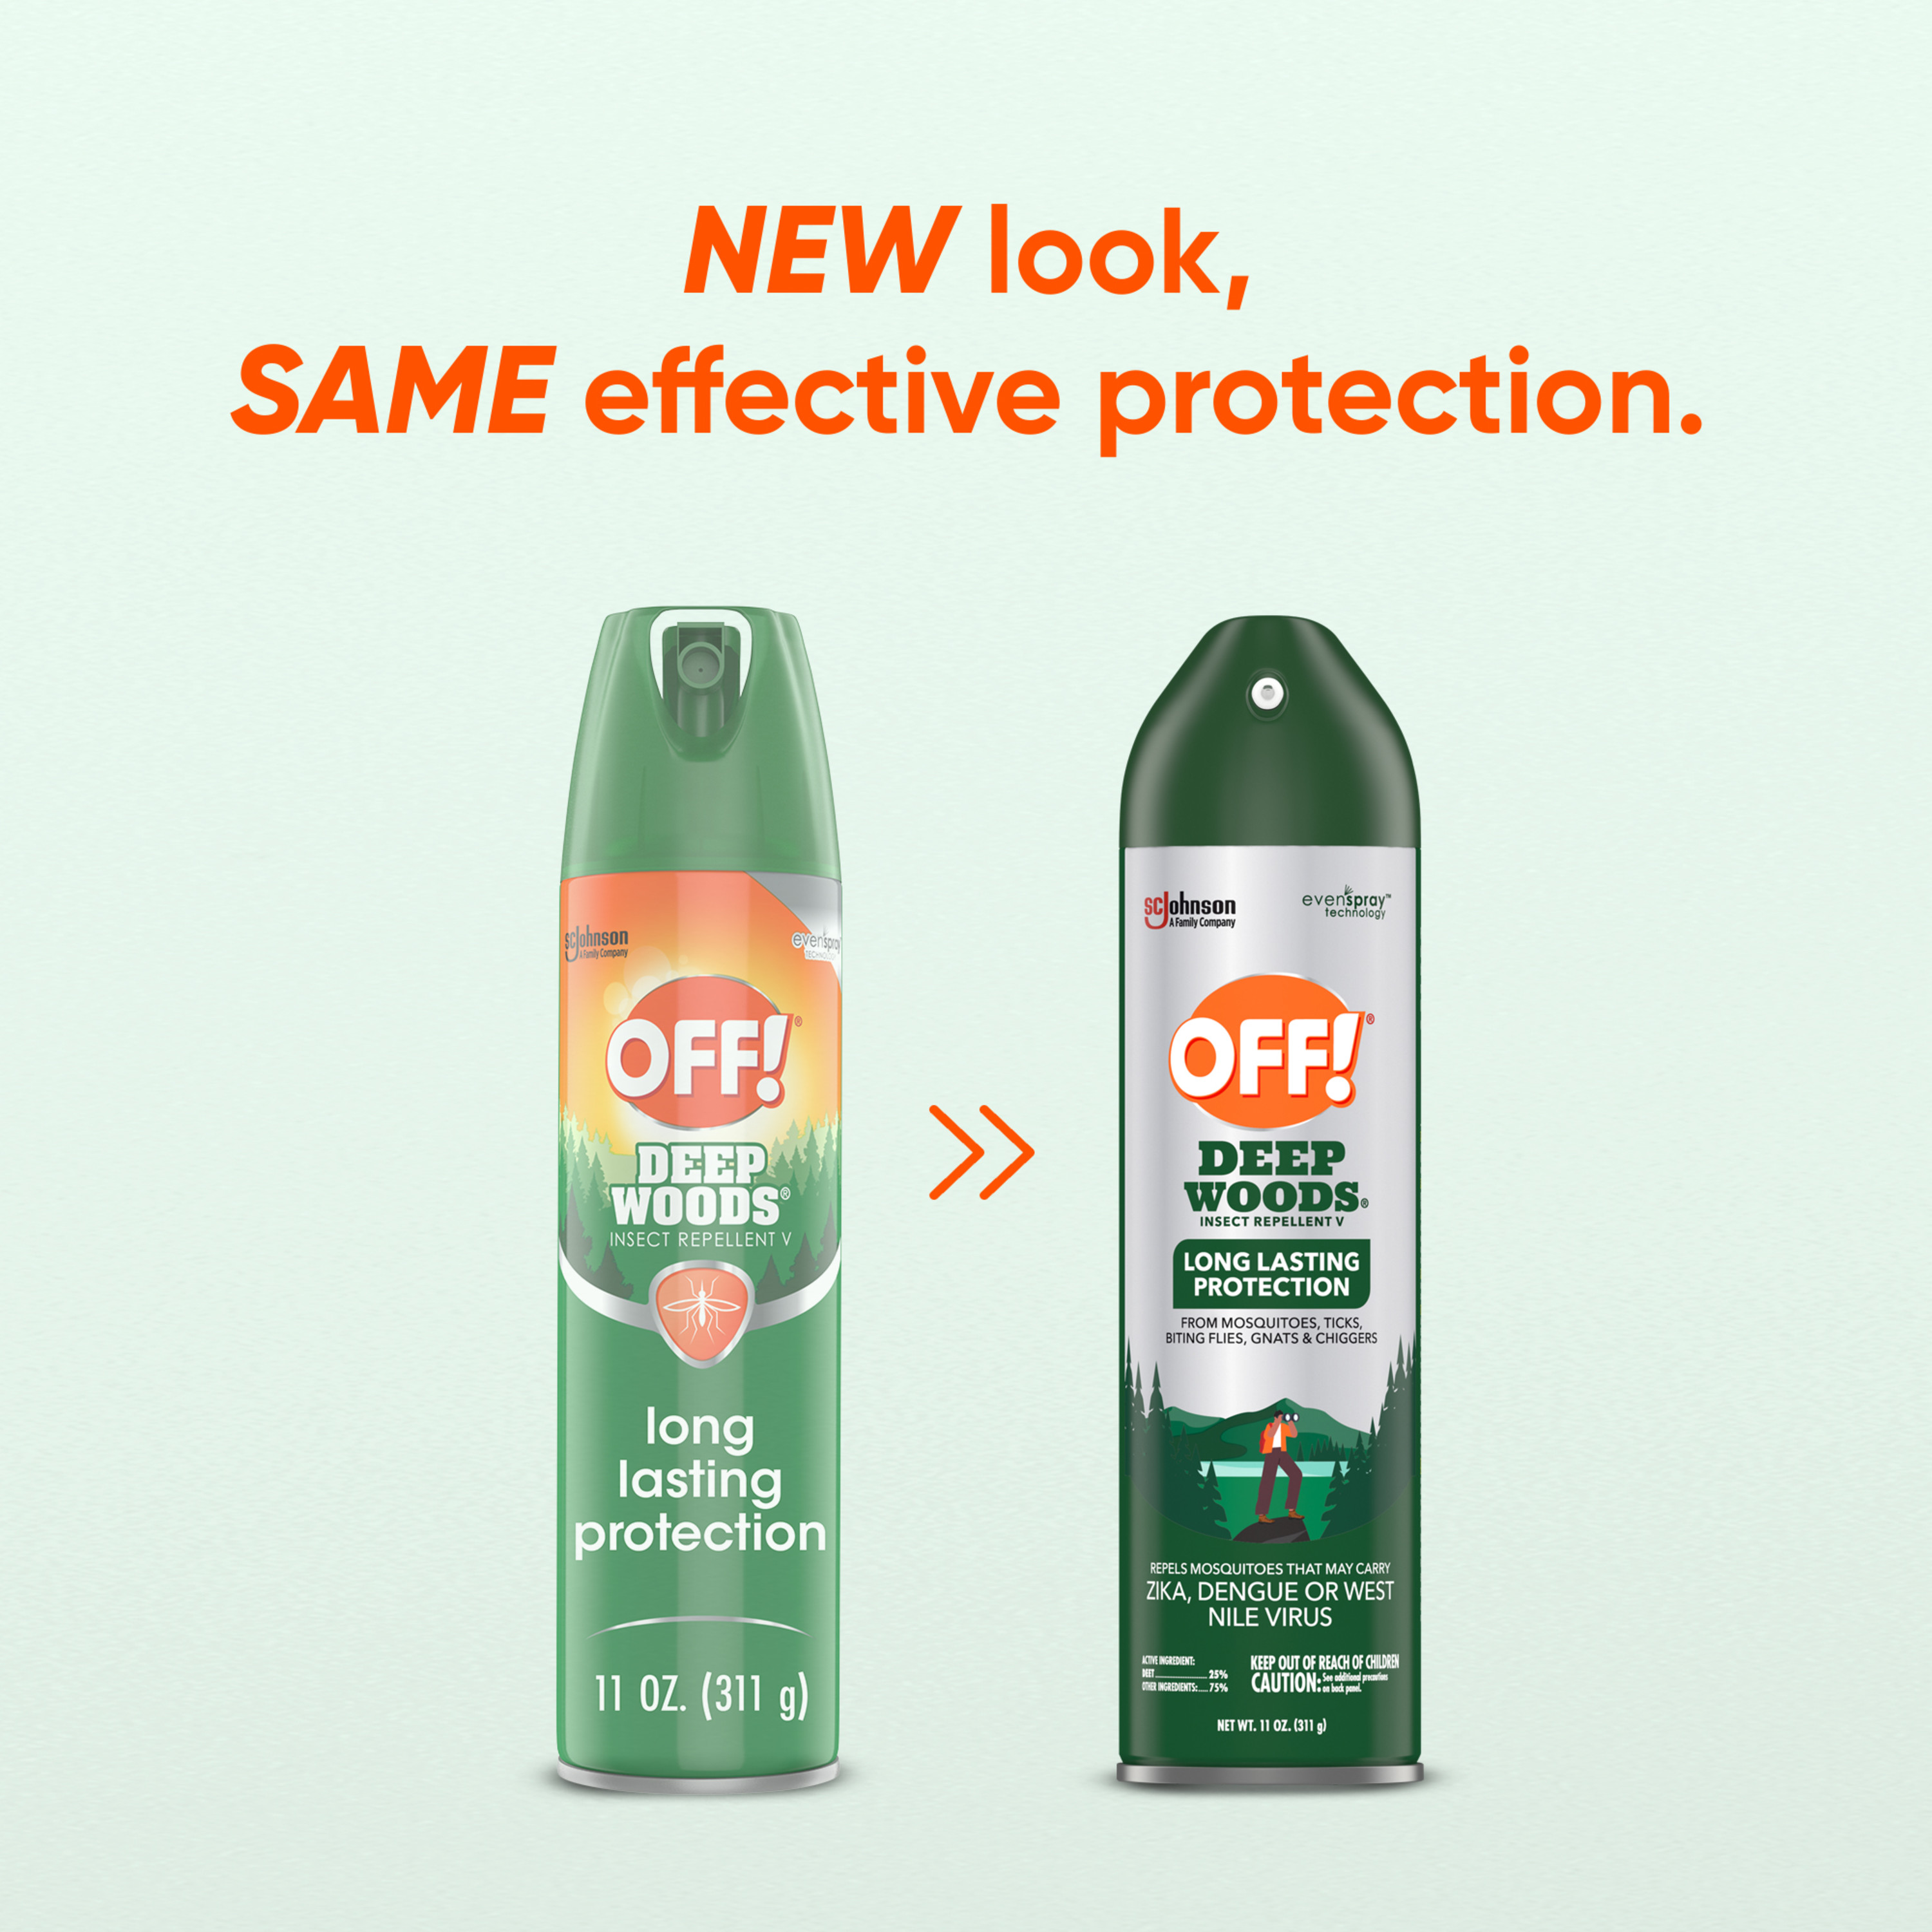 OFF! Deep Woods Insect Repellent V, Mosquito Bug Spray, Up to 8 Hours of Protection with DEET, 11 oz - image 5 of 17